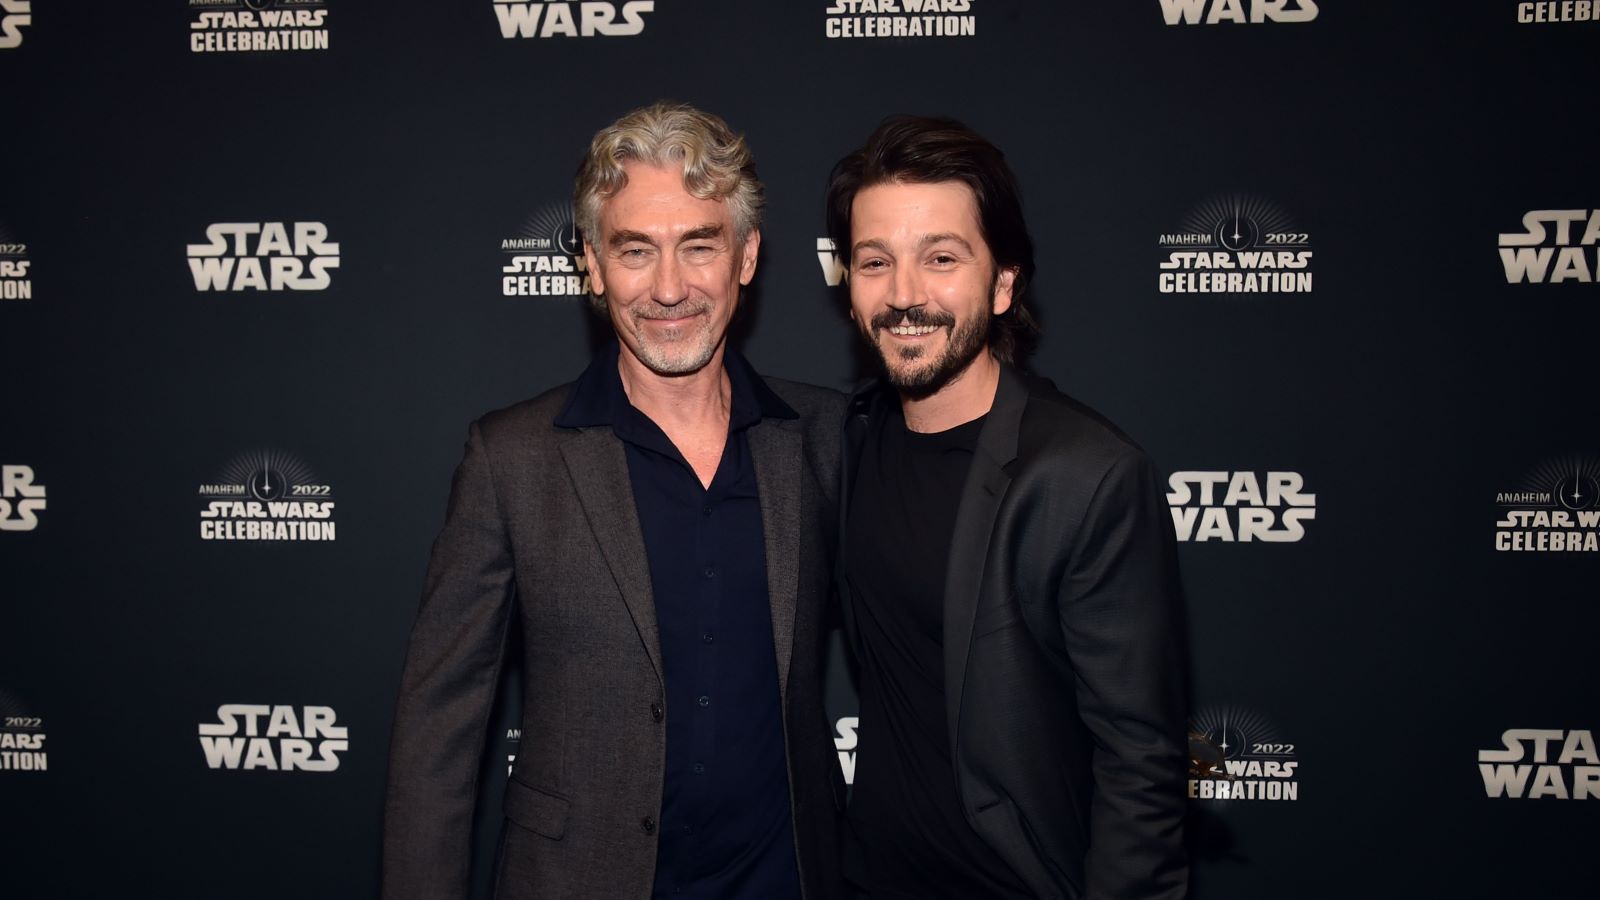 Tony Gilroy and Diego Luna attend the studio showcase panel at Star Wars Celebration for “Andor” in Anaheim, California on May 26, 2022. The new original series from Lucasfilm launches exclusively on Disney+ August 31. (Photo by Alberto E. Rodriguez/Getty (Images for Disney)